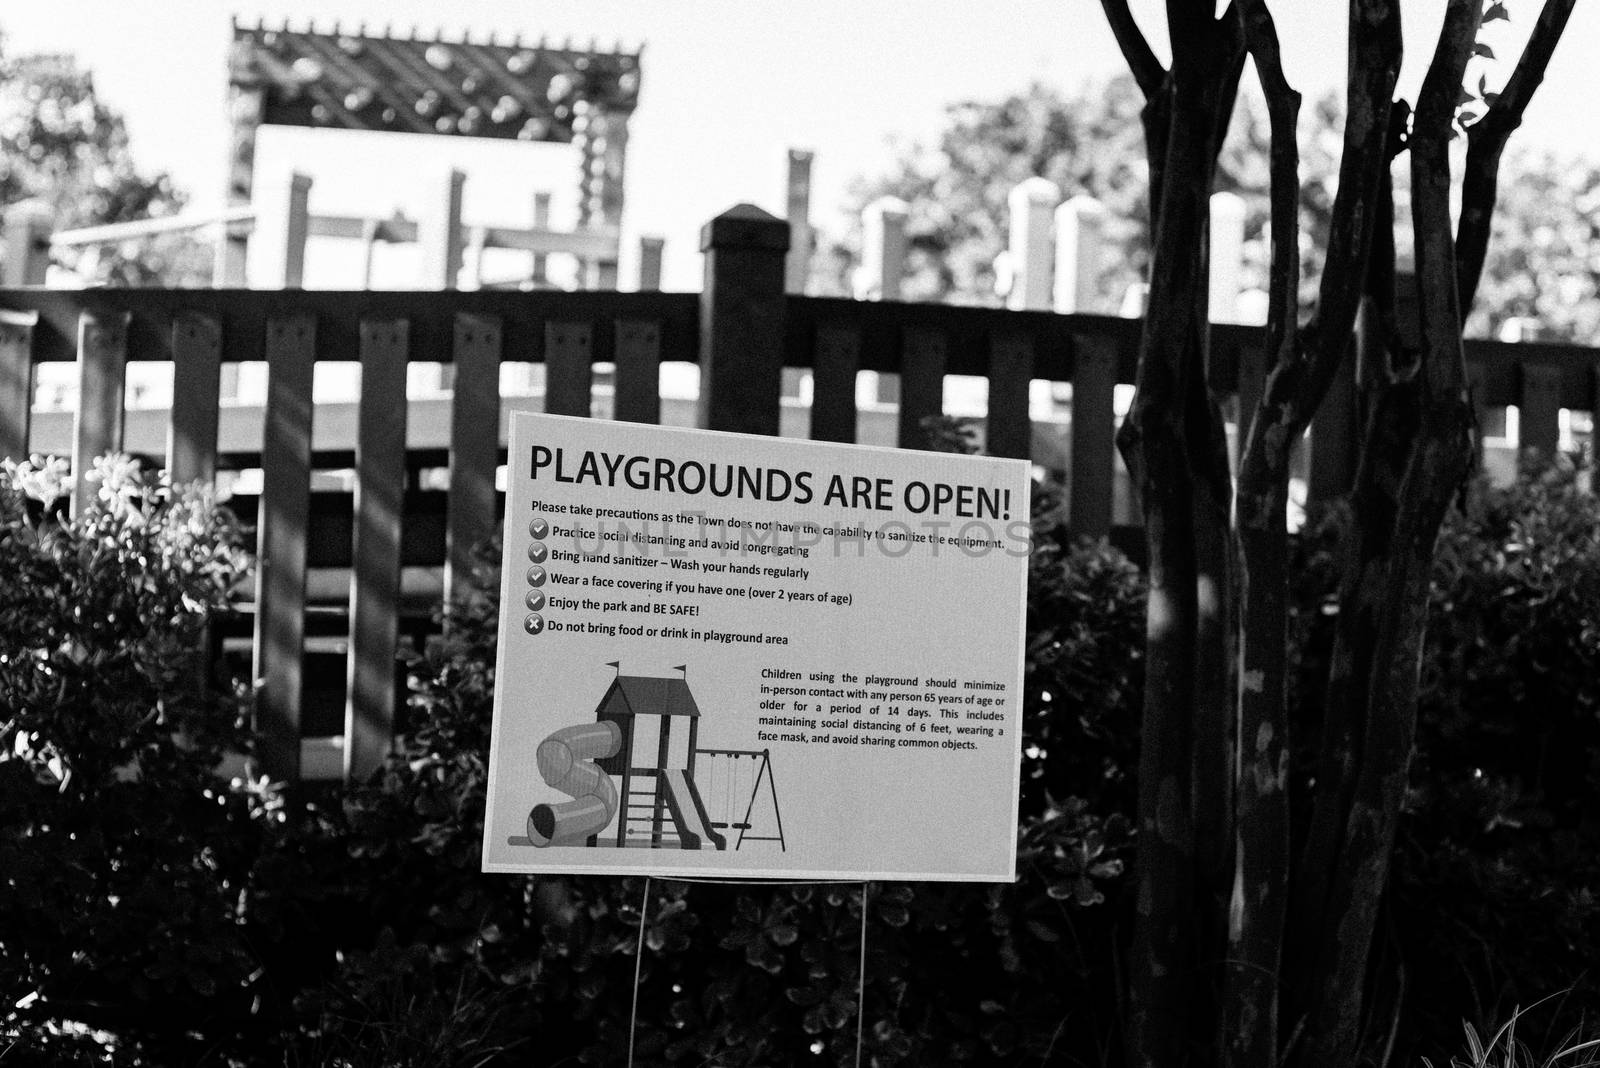 Vintage tone playgrounds are open sign at public recreational place near Dallas, Texas, America